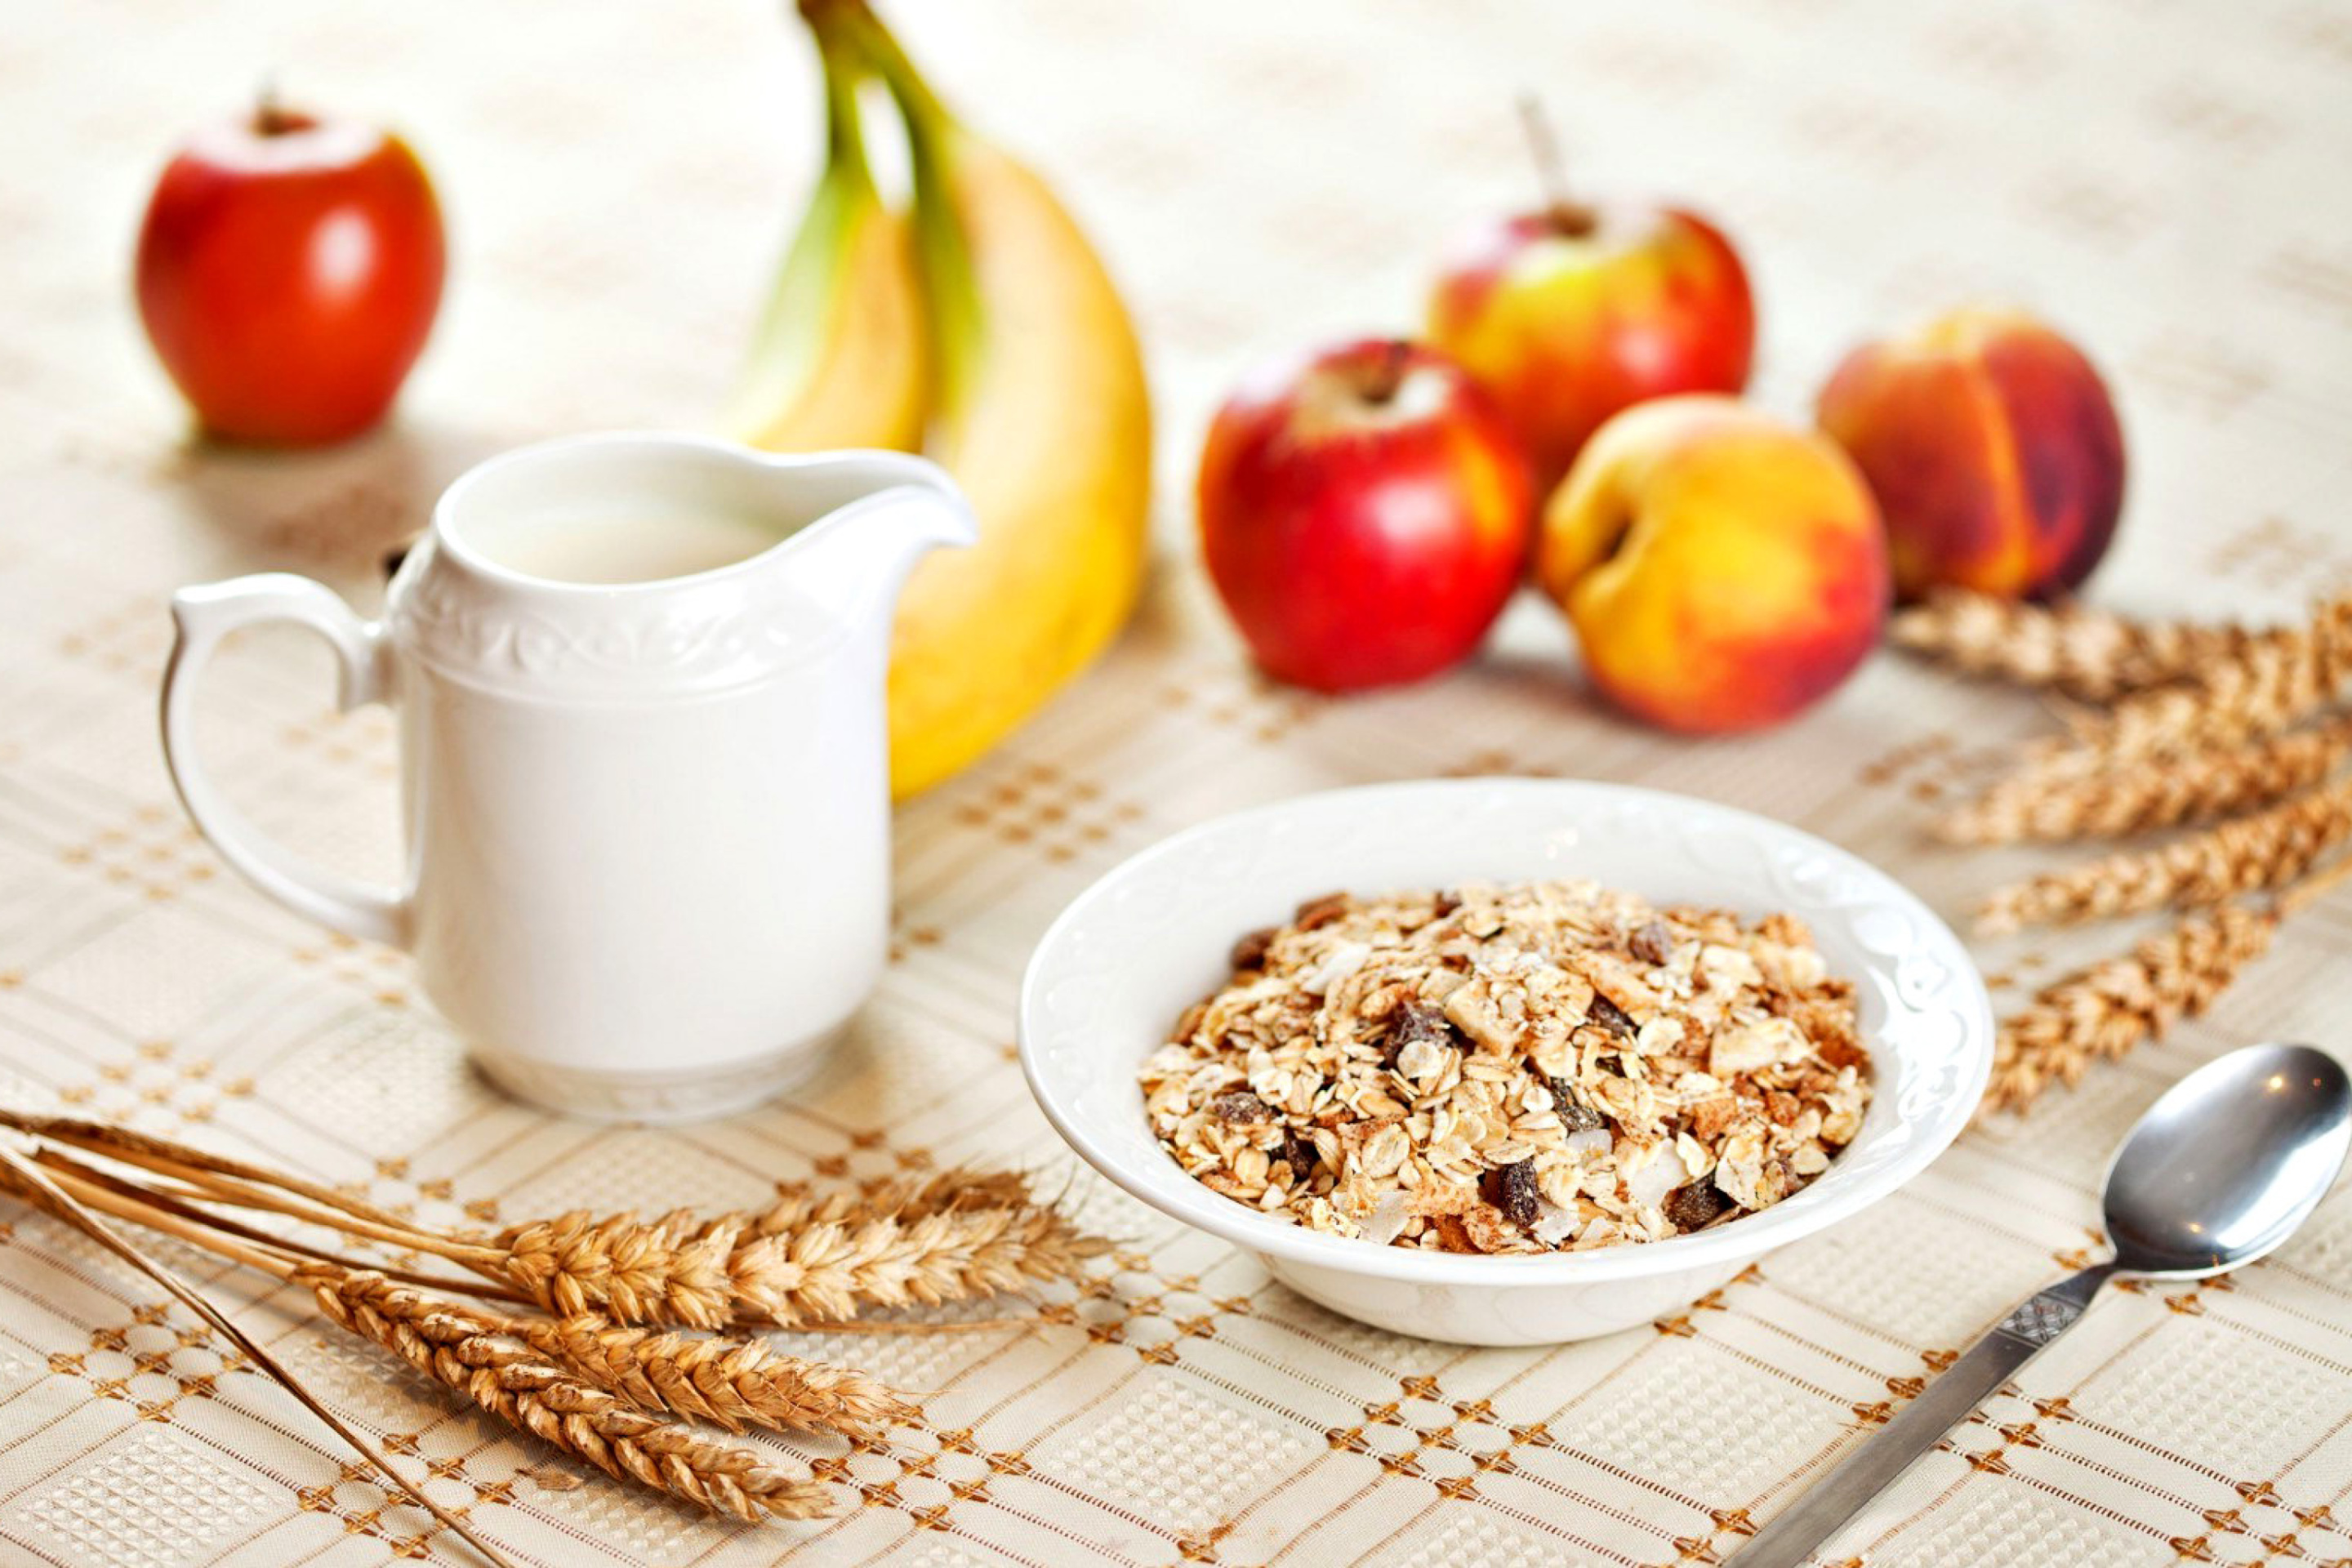 Breakfast with bananas and oatmeal wallpaper 2880x1920